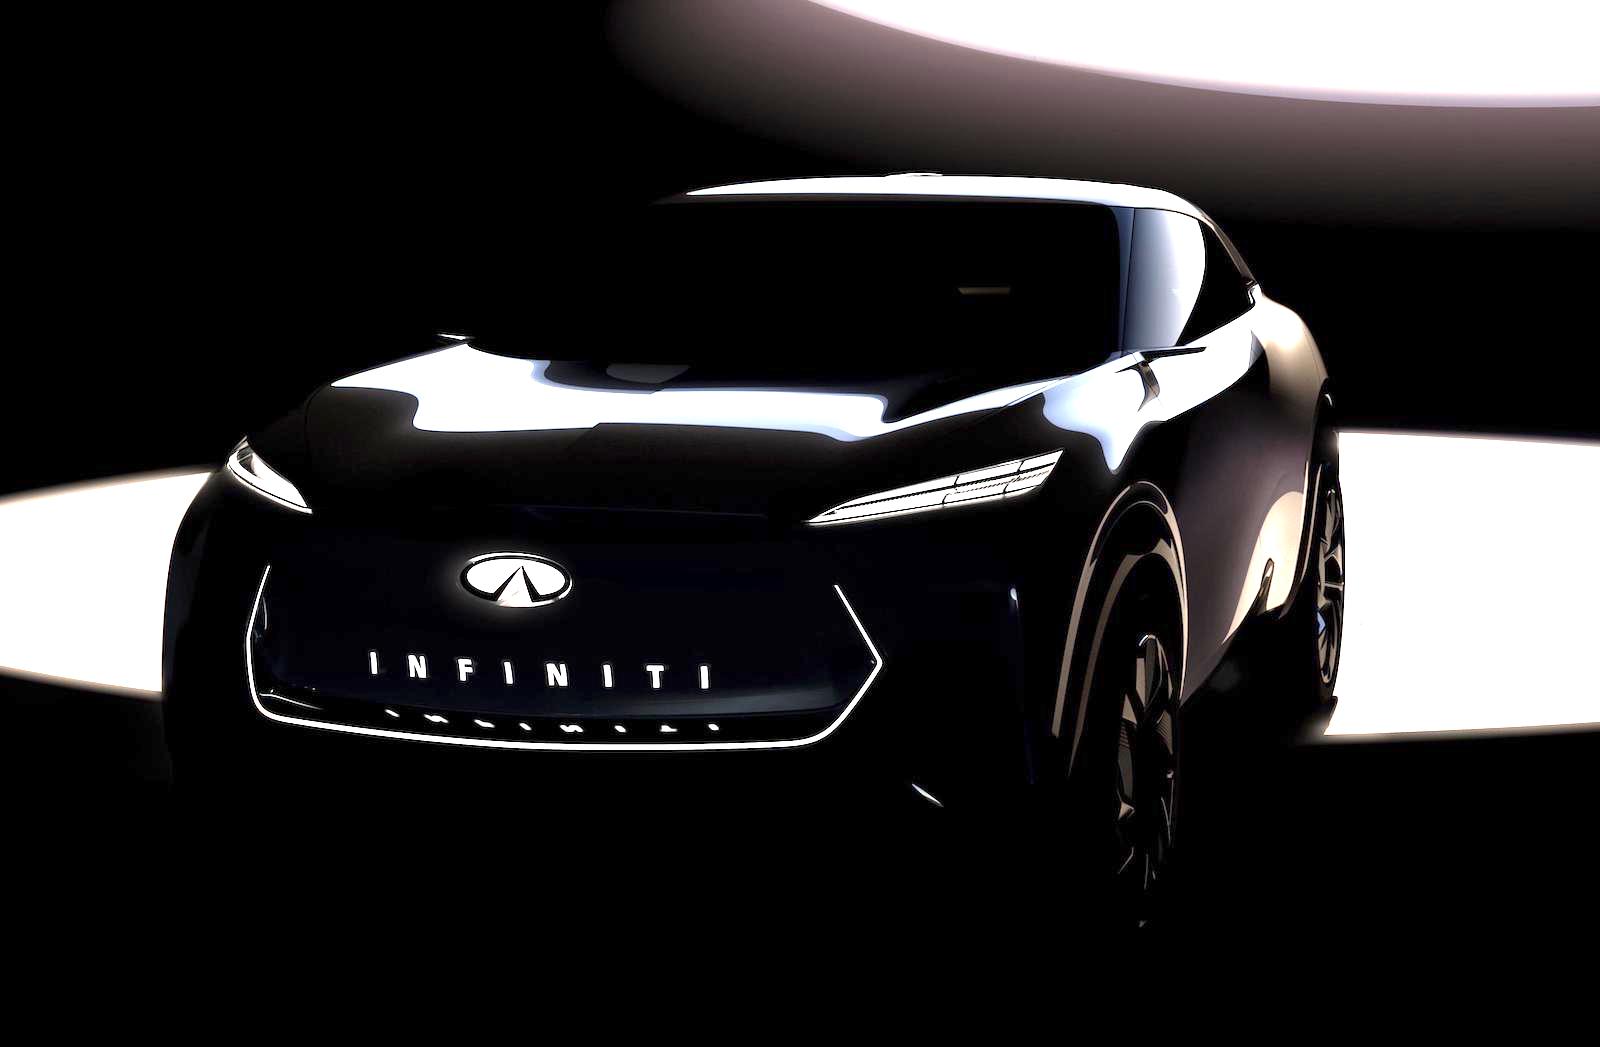 Infiniti previews electric crossover concept for Detroit show